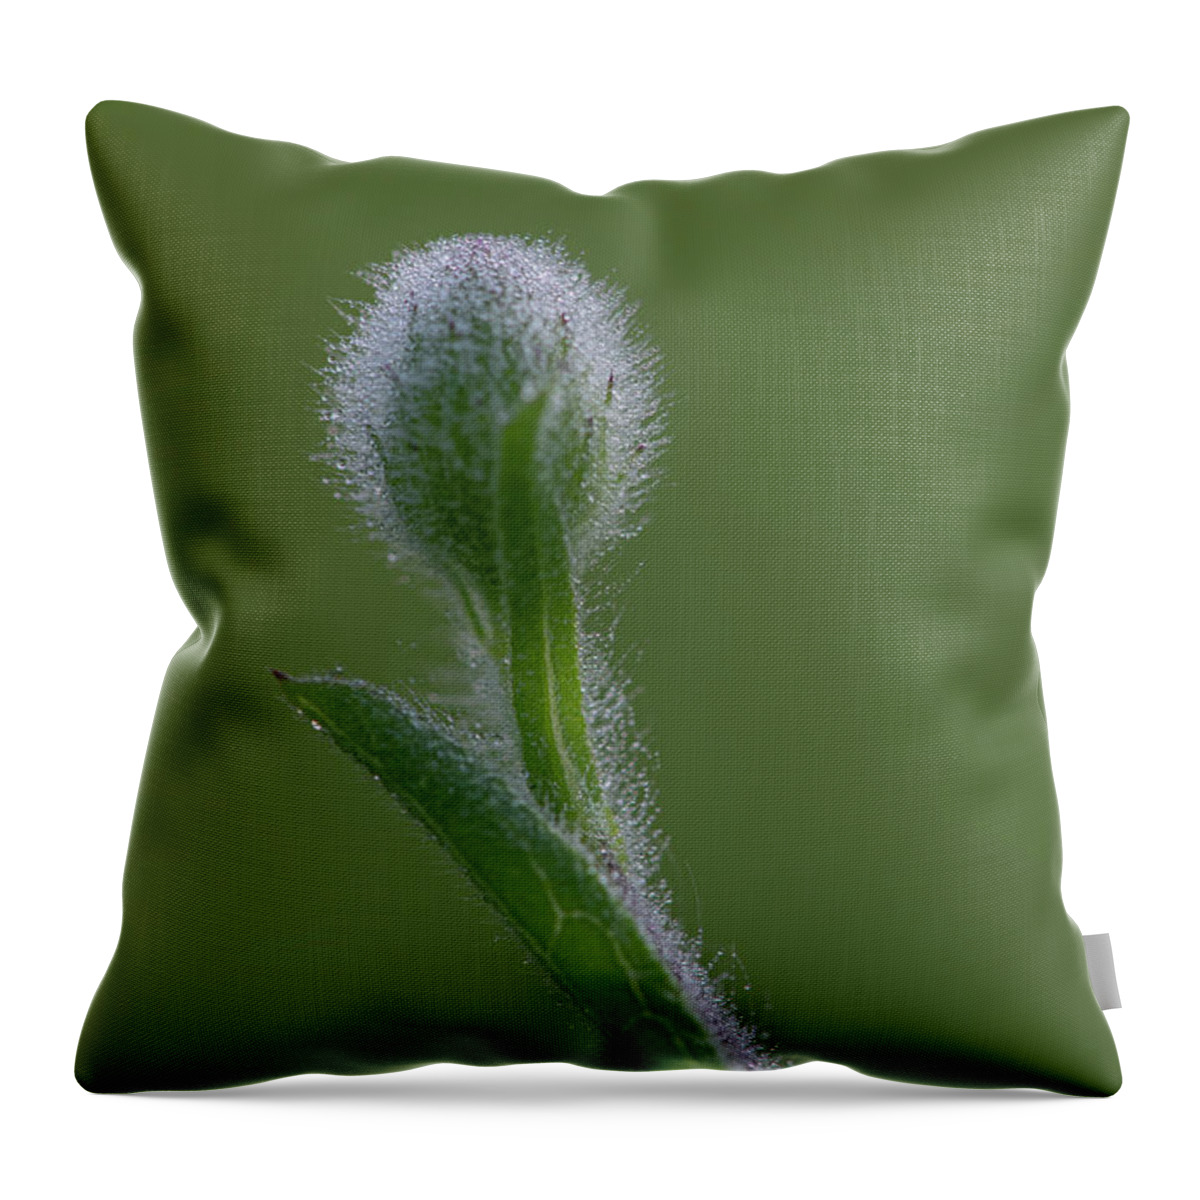 Dew Throw Pillow featuring the photograph Dew On A Groundsel Bud by Karen Rispin